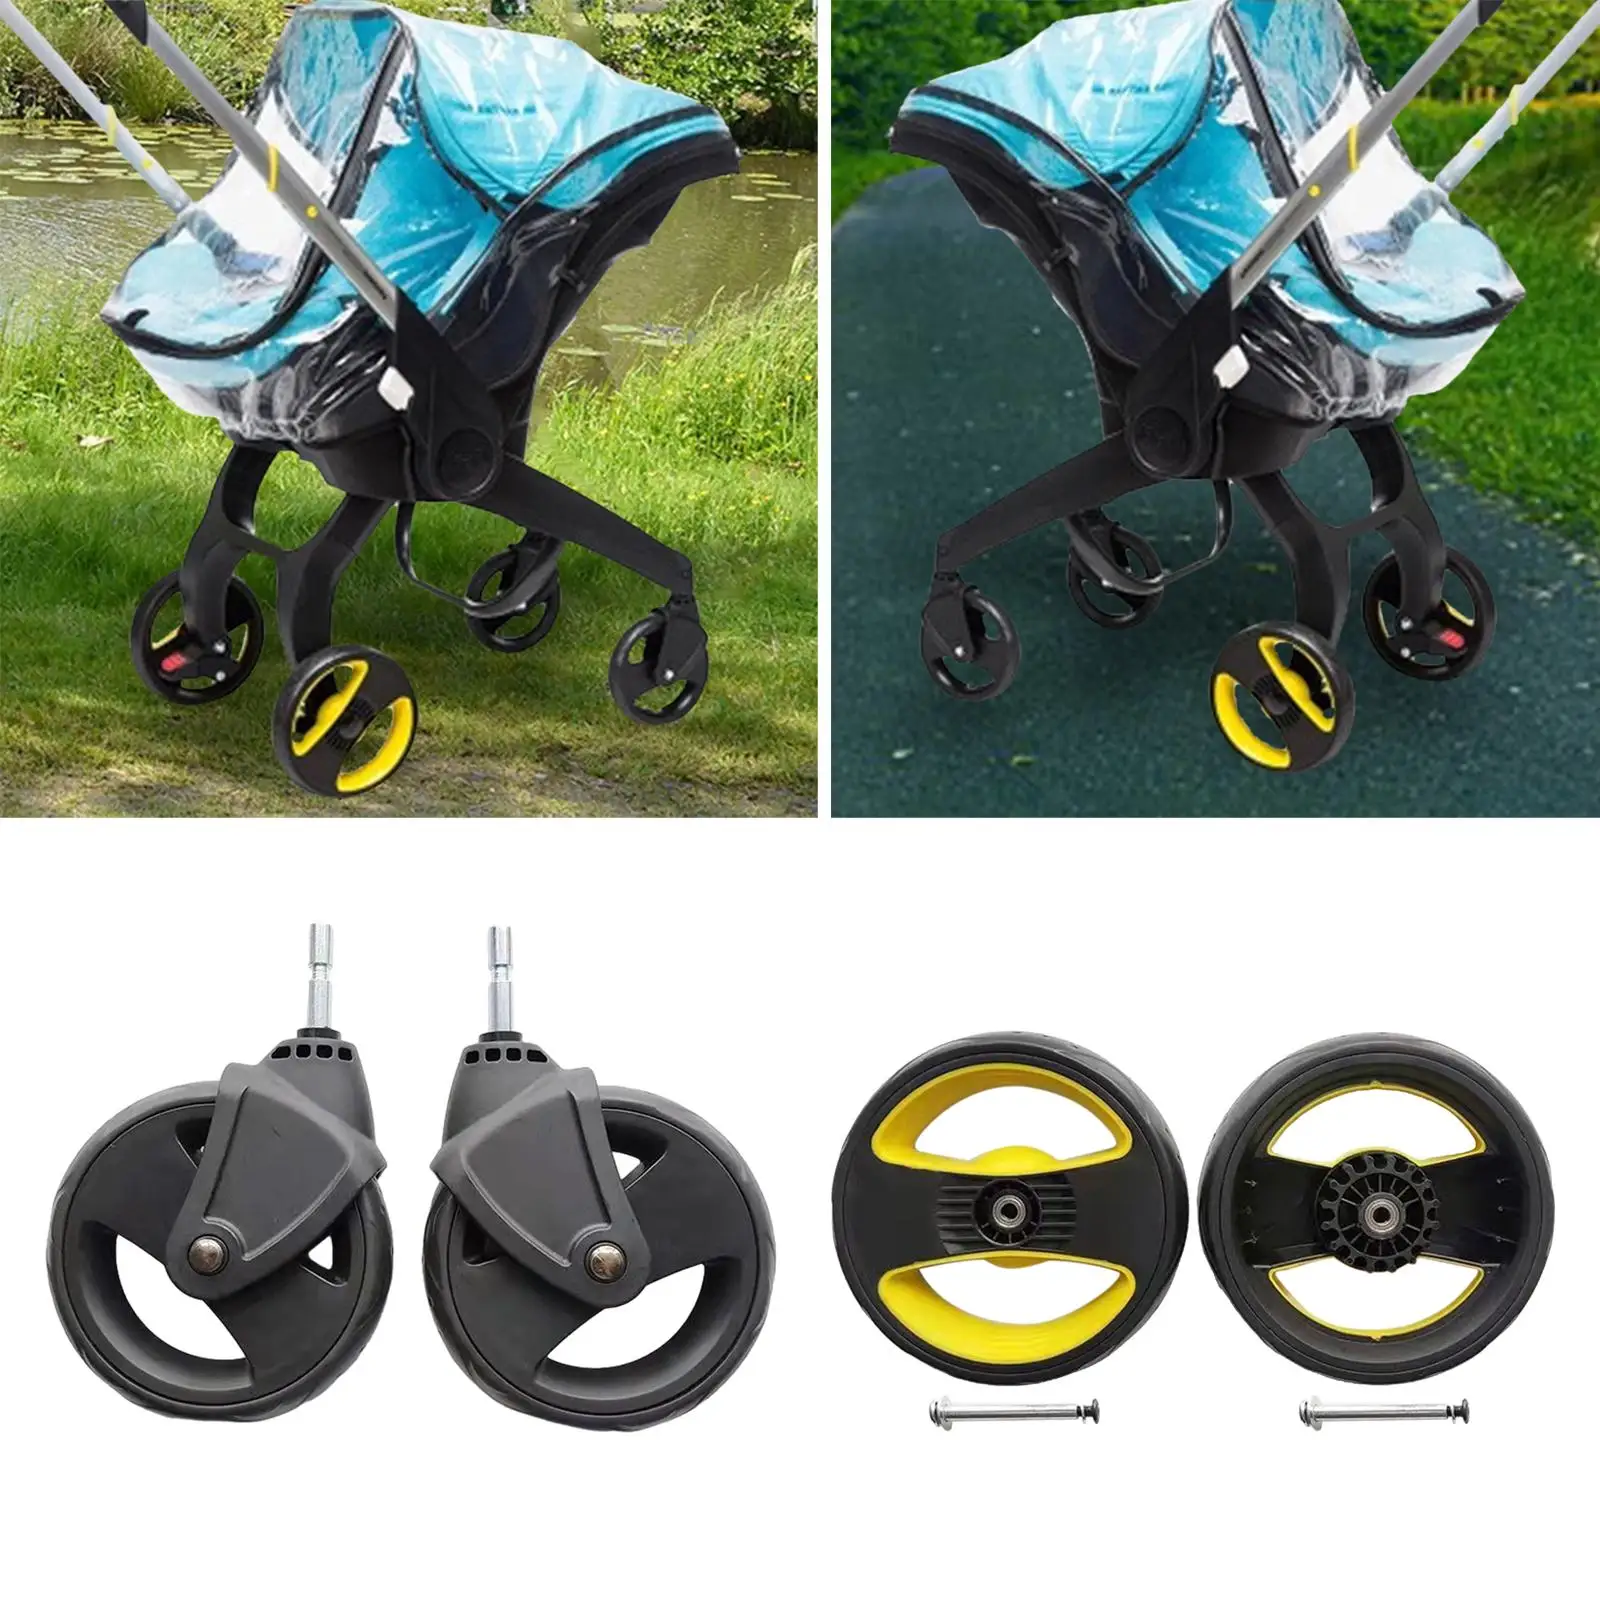 2x Tire Pram Durable for Infant Carriage Wheel Replacement Upgrade Parts Pushchair Accessories Trolley Wheel Trolley Wheel Set